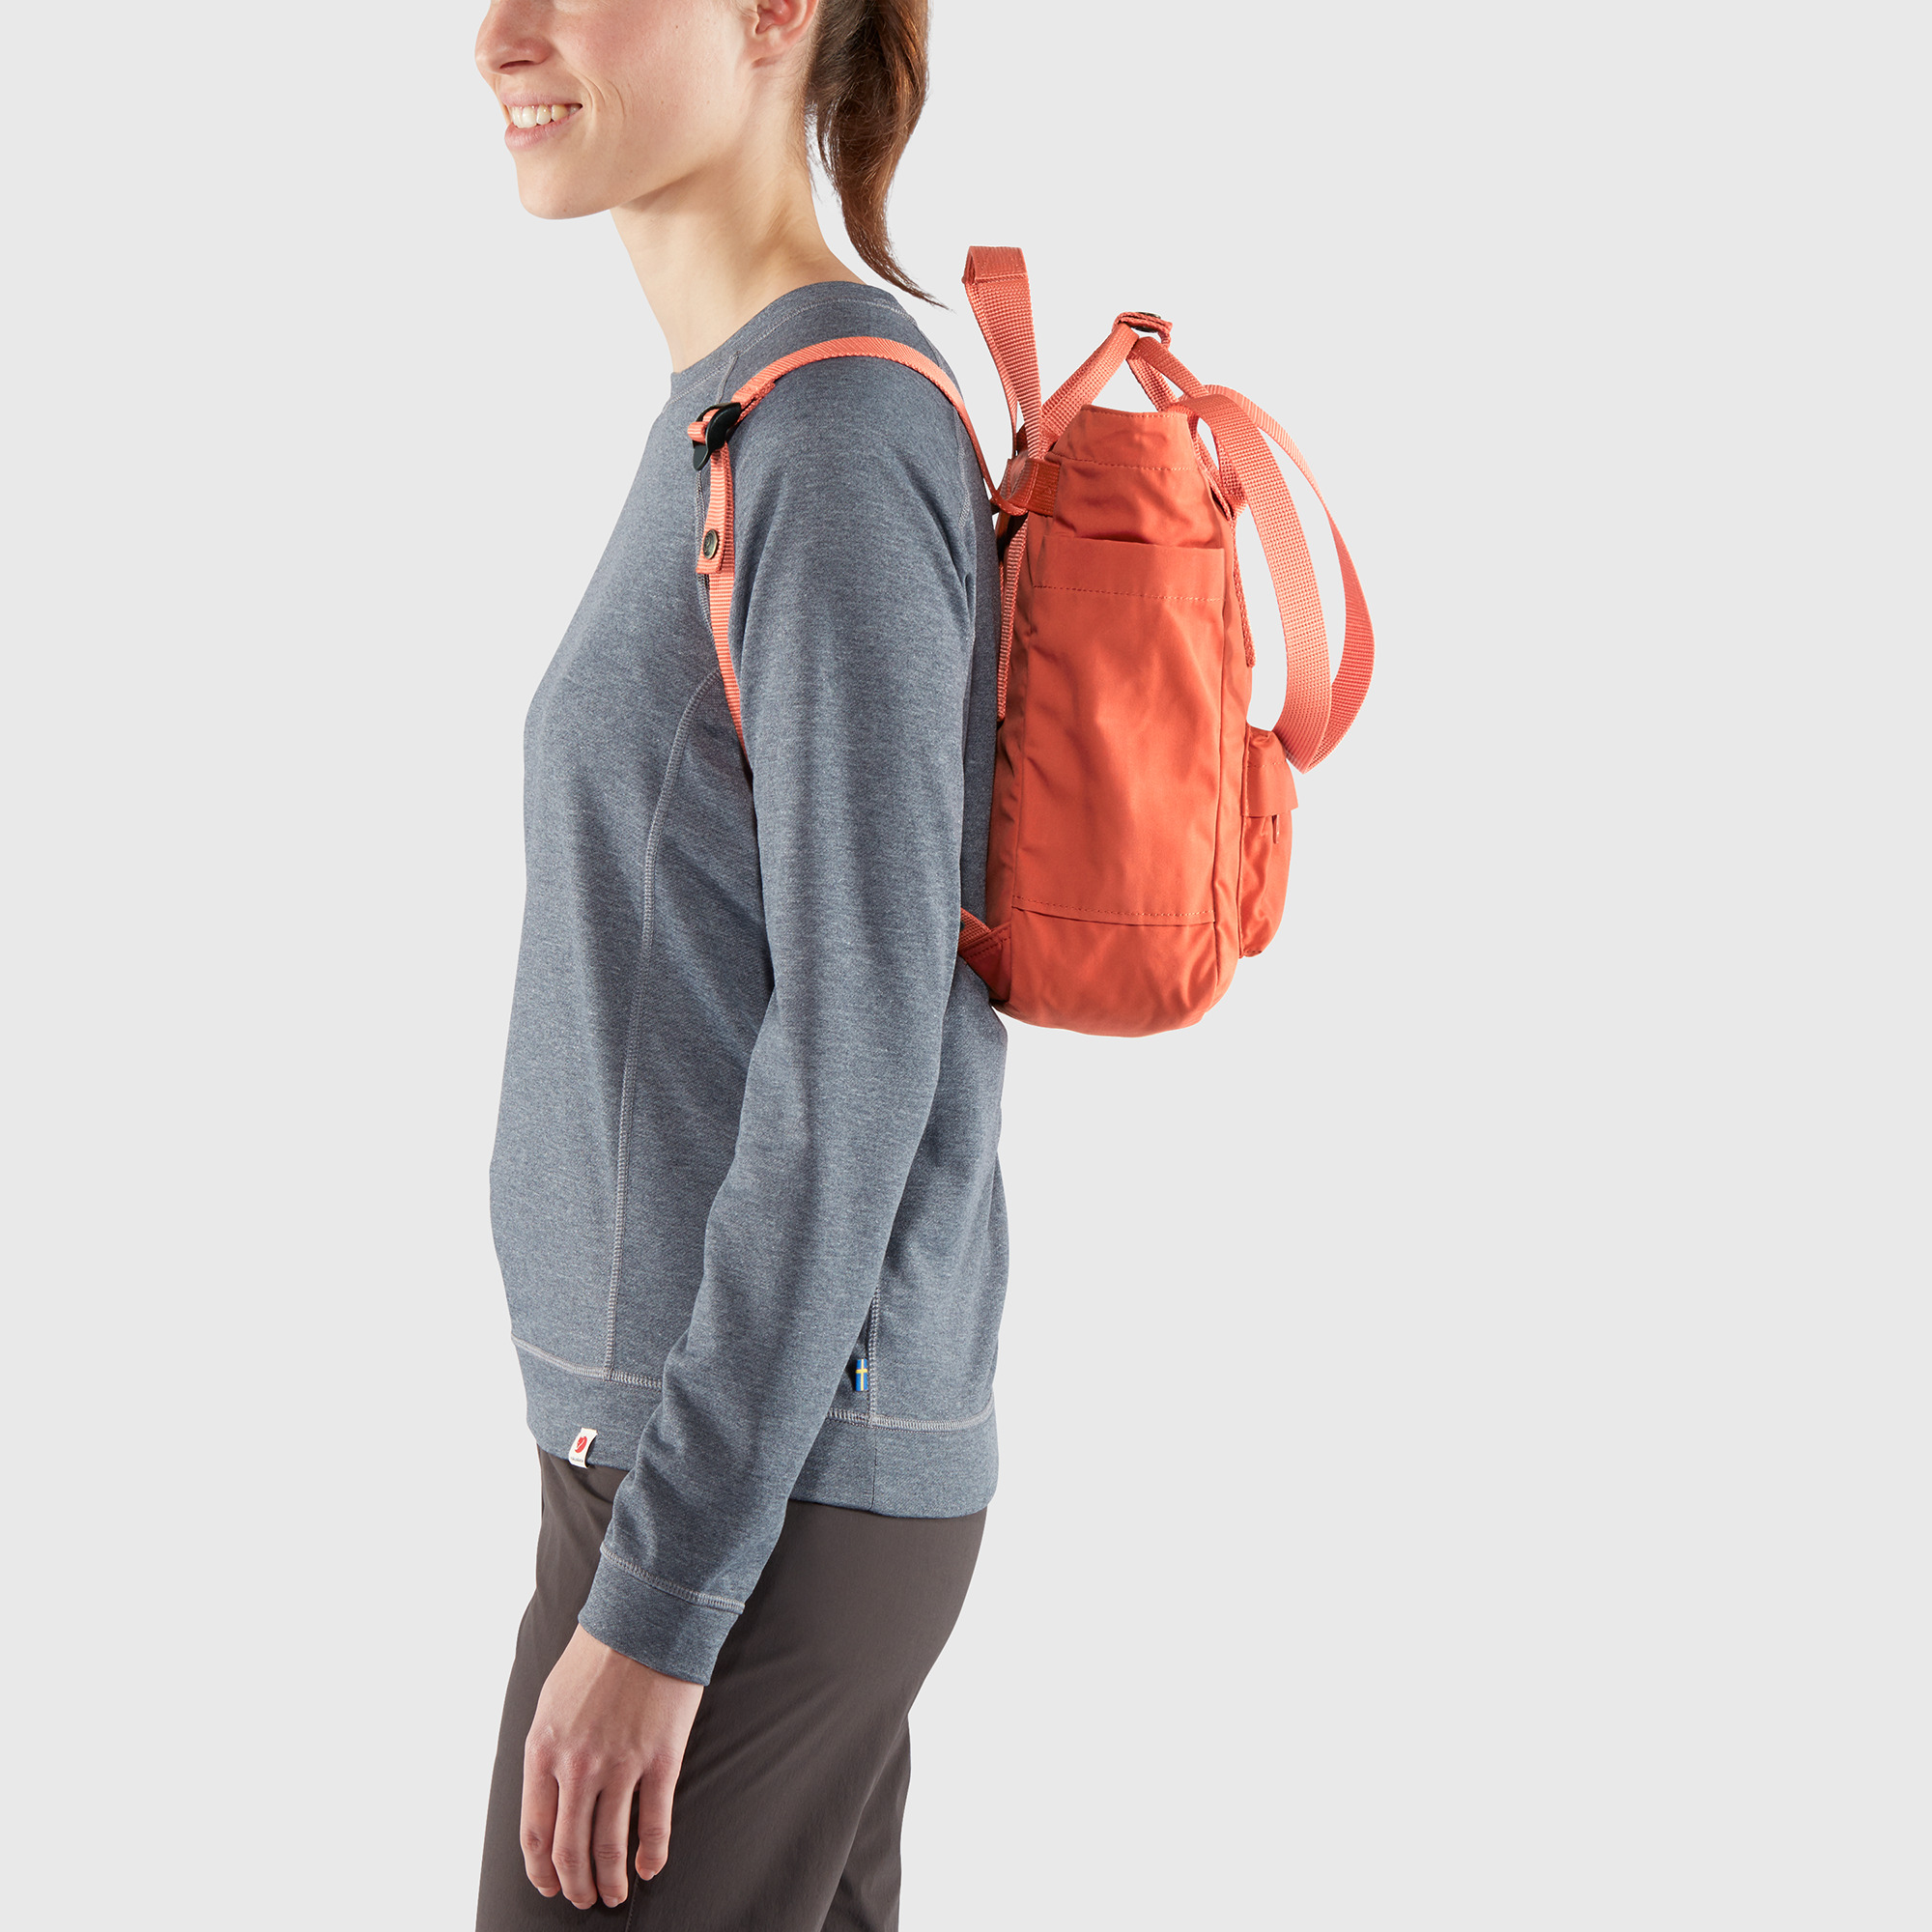 Kanken Totepack Mini Backpack with Tablet Sleeve for Everyday Use and Travel Fjallraven Frost Green 